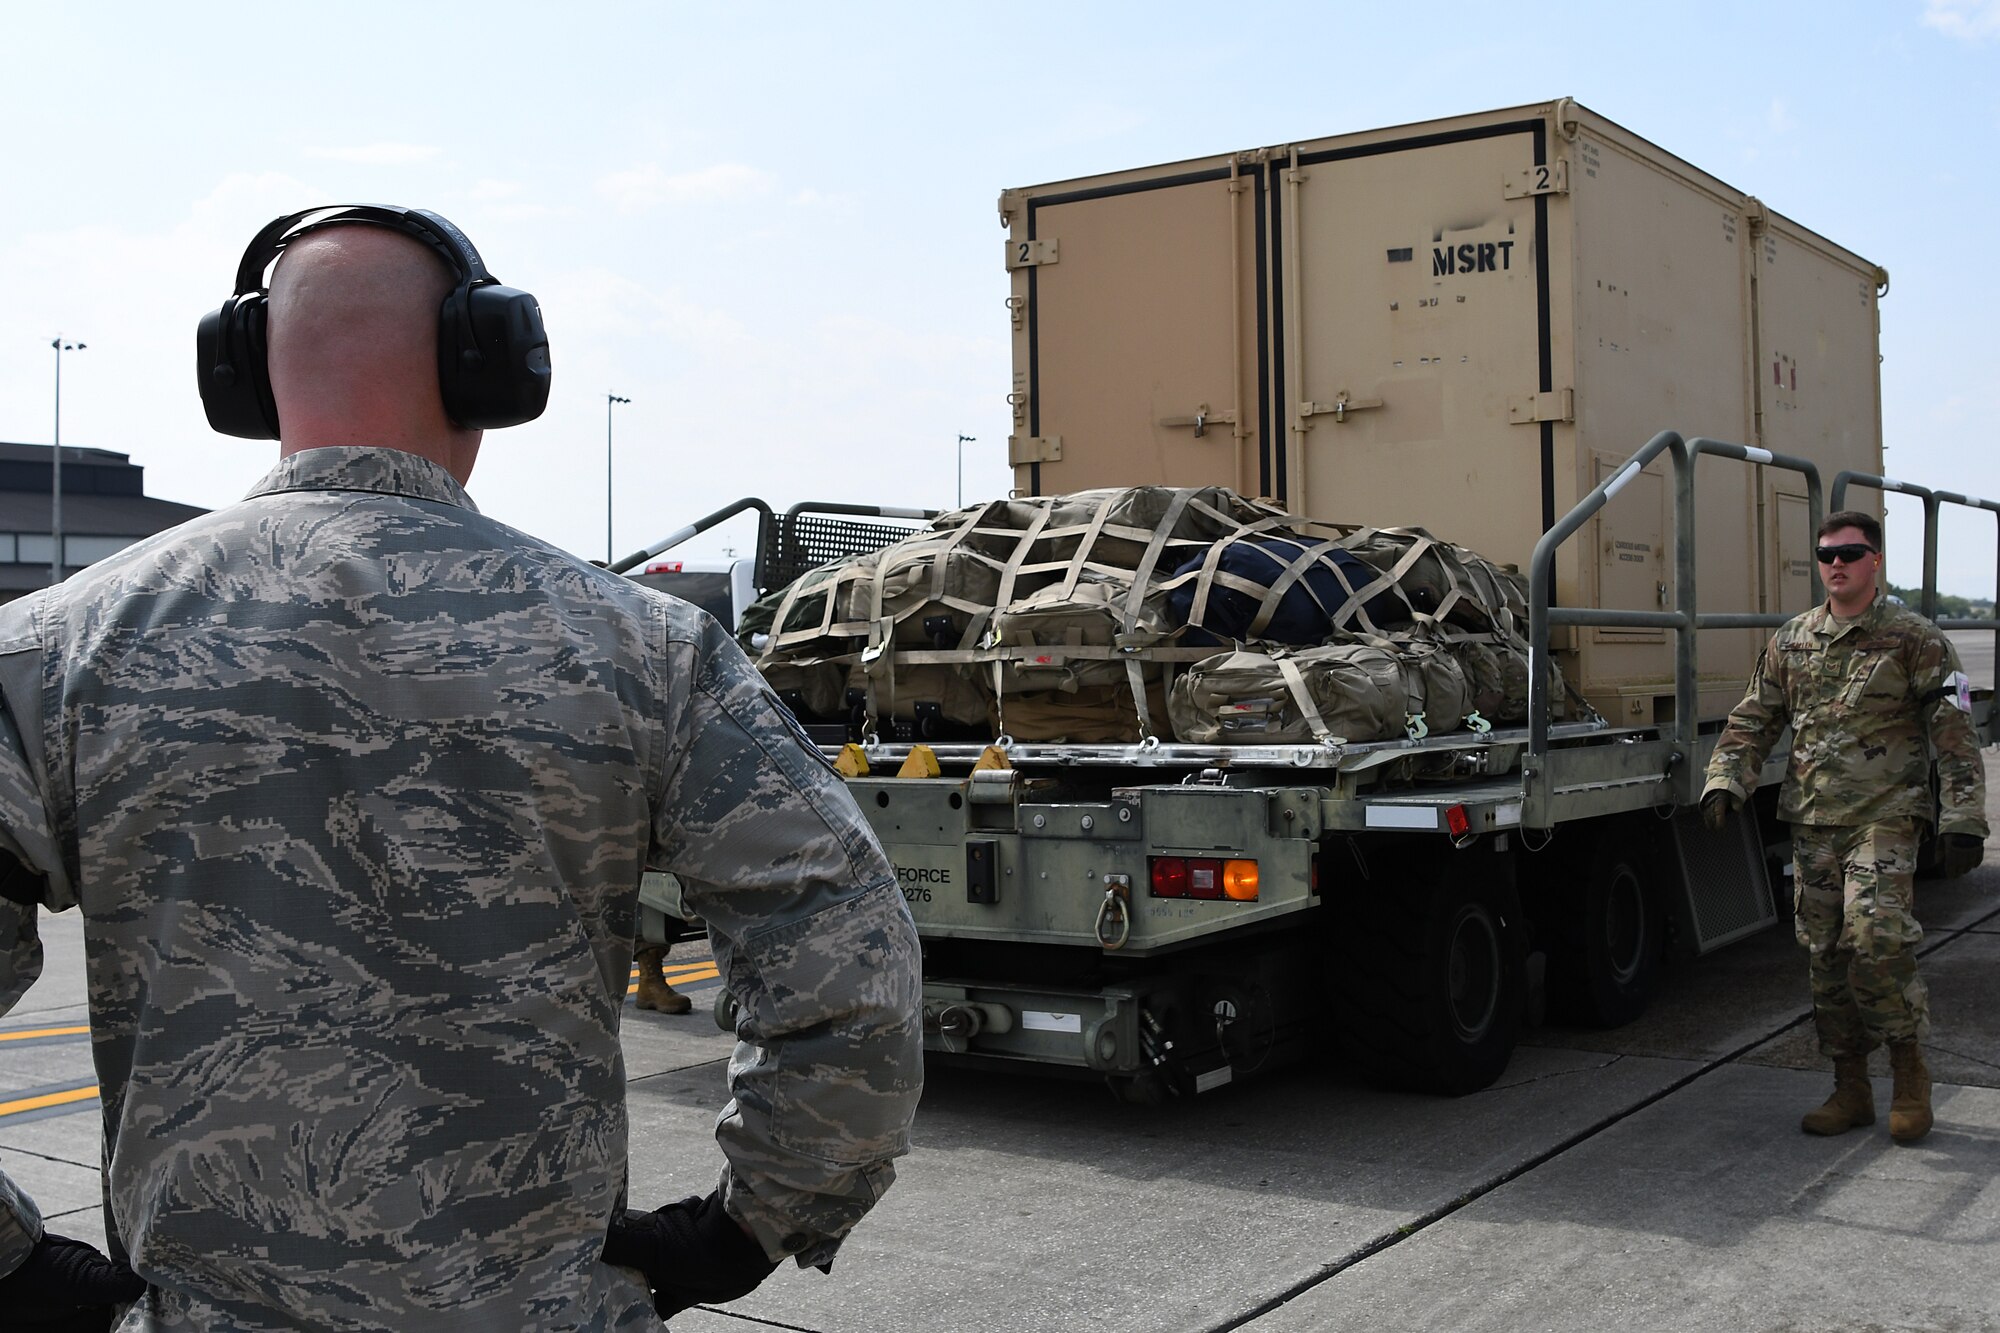 U.S. Air Force Tech. Sgt. Brian Teachout, 81st Logistics Readiness Squadron Small Air Terminal NCO in charge, and Staff. Sgt. Drayton Callen, 81st LRS deployment training NCO in charge, wait for a forklift to unload cargo in support of exercise Neptune Guardian on Keesler Air Force Base, Mississippi, April 5, 2019. The 81st LRS acted as a one-stop shop for ground and air transportation as well as munition requirements for joint exercise Neptune Guardian between the U.S. Coast Guard and U.S. Navy. (U.S. Air Force photo by Senior Airman Suzie Plotnikov)